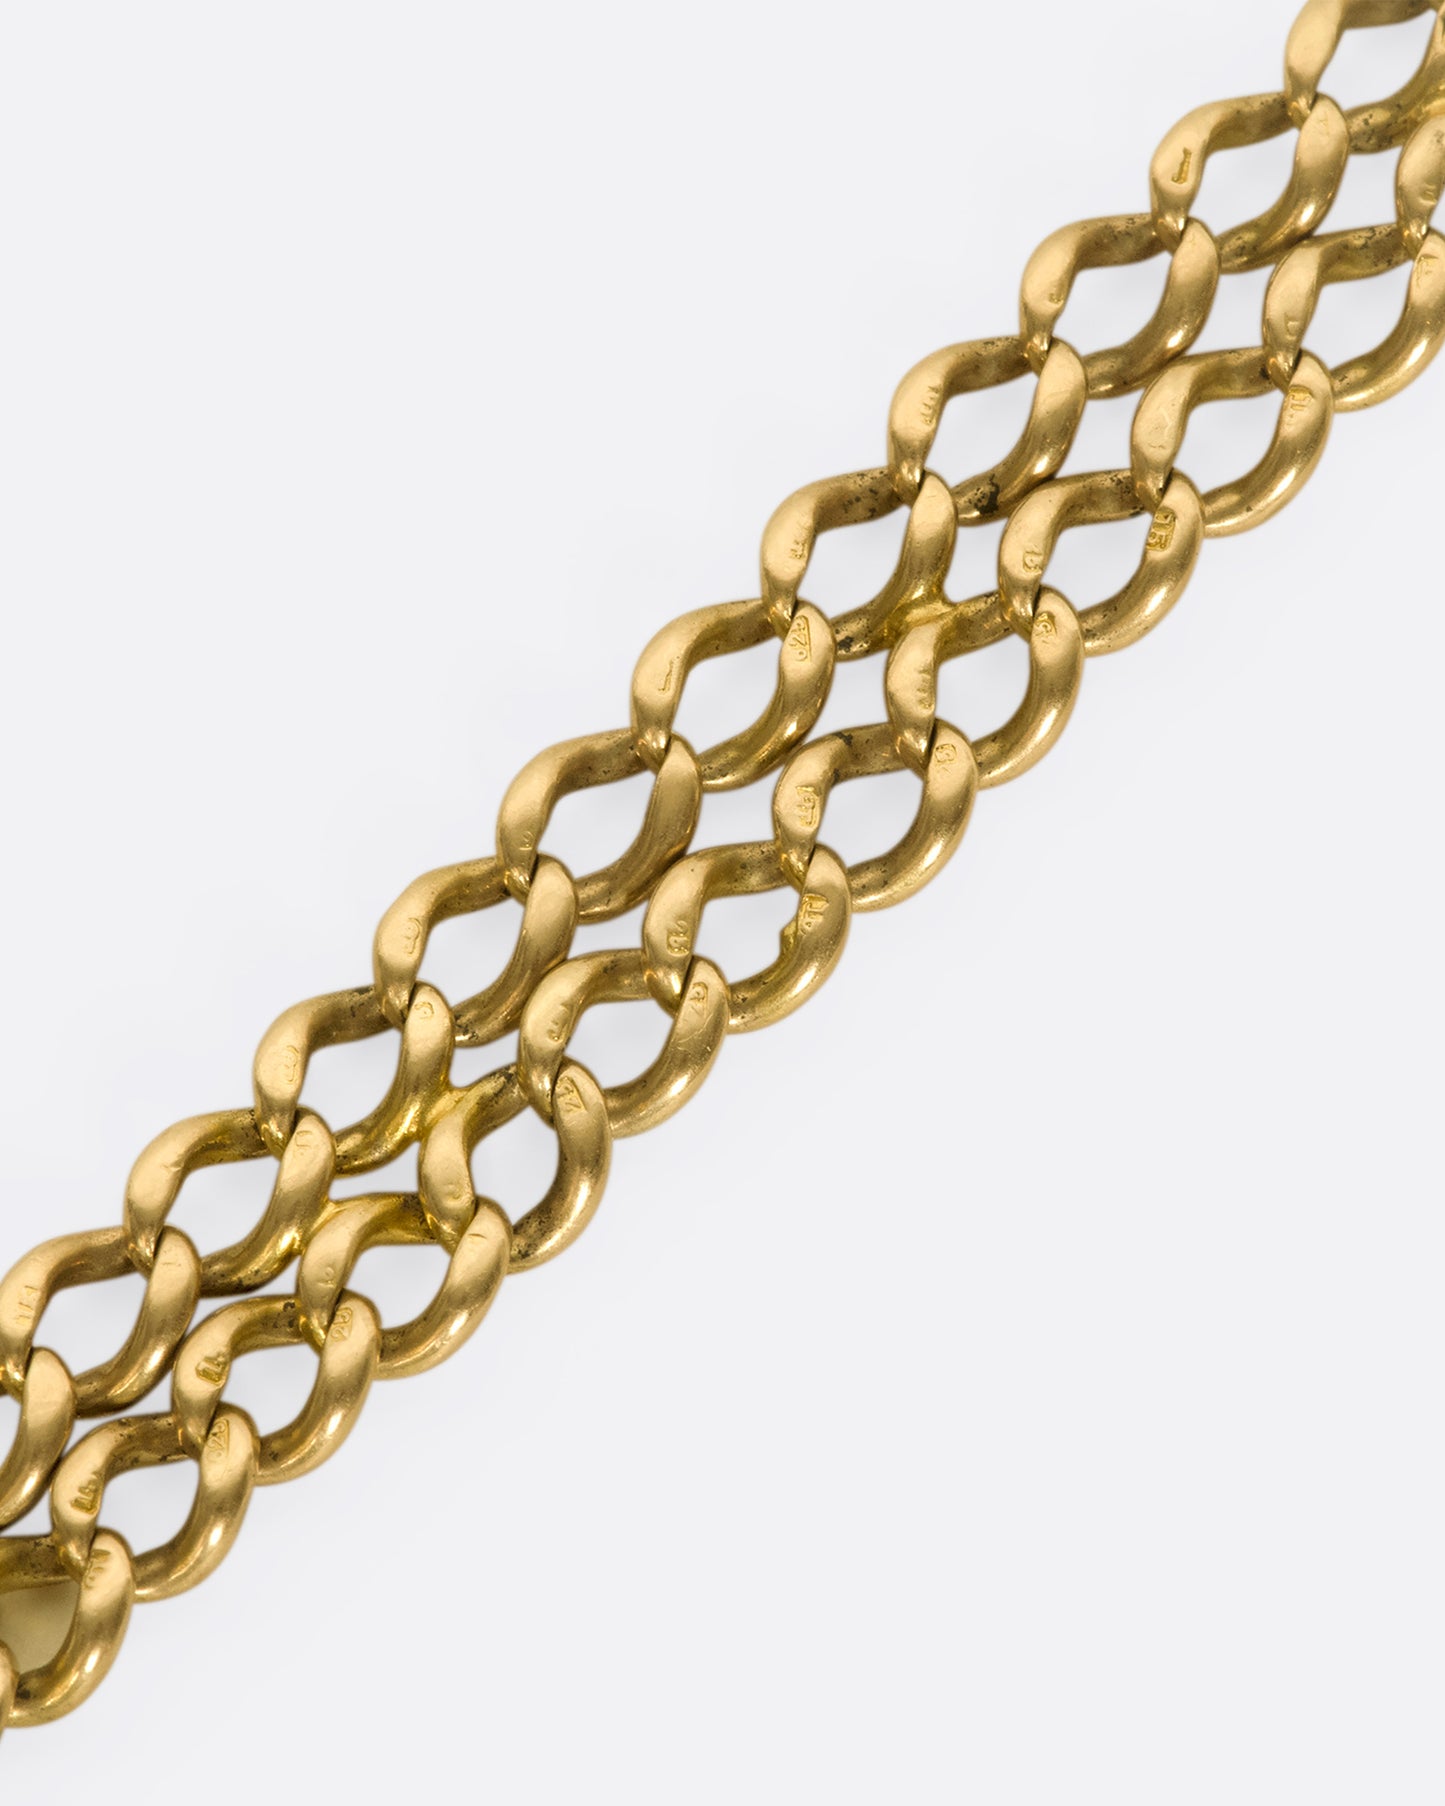 A 15k gold 1950s double-chain bracelet with substantial square clasp, engraved SCB.